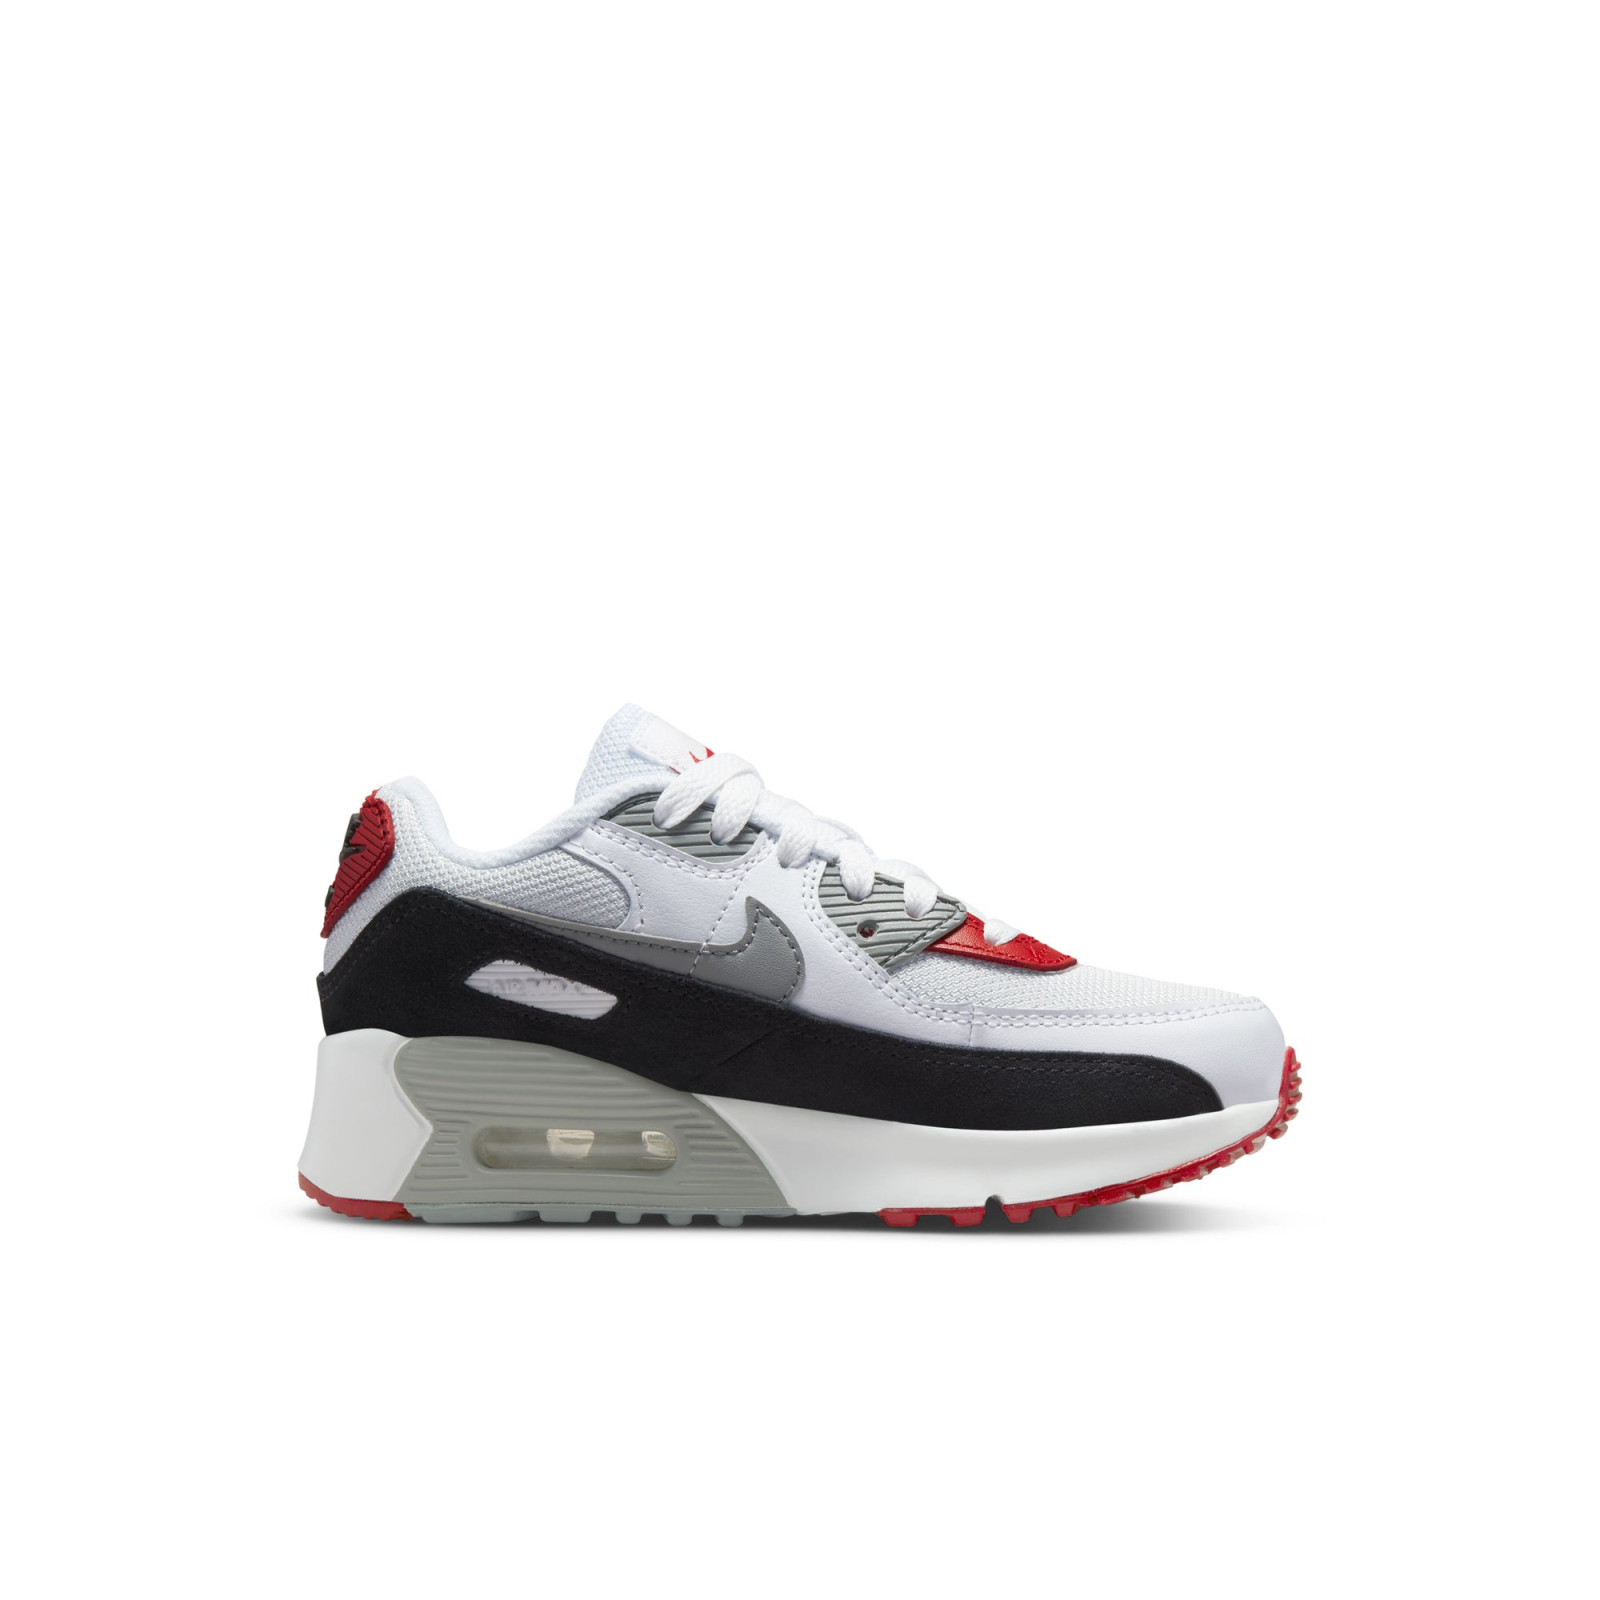 NIKE AIR MAX 90 PS WHITE RED 28-35